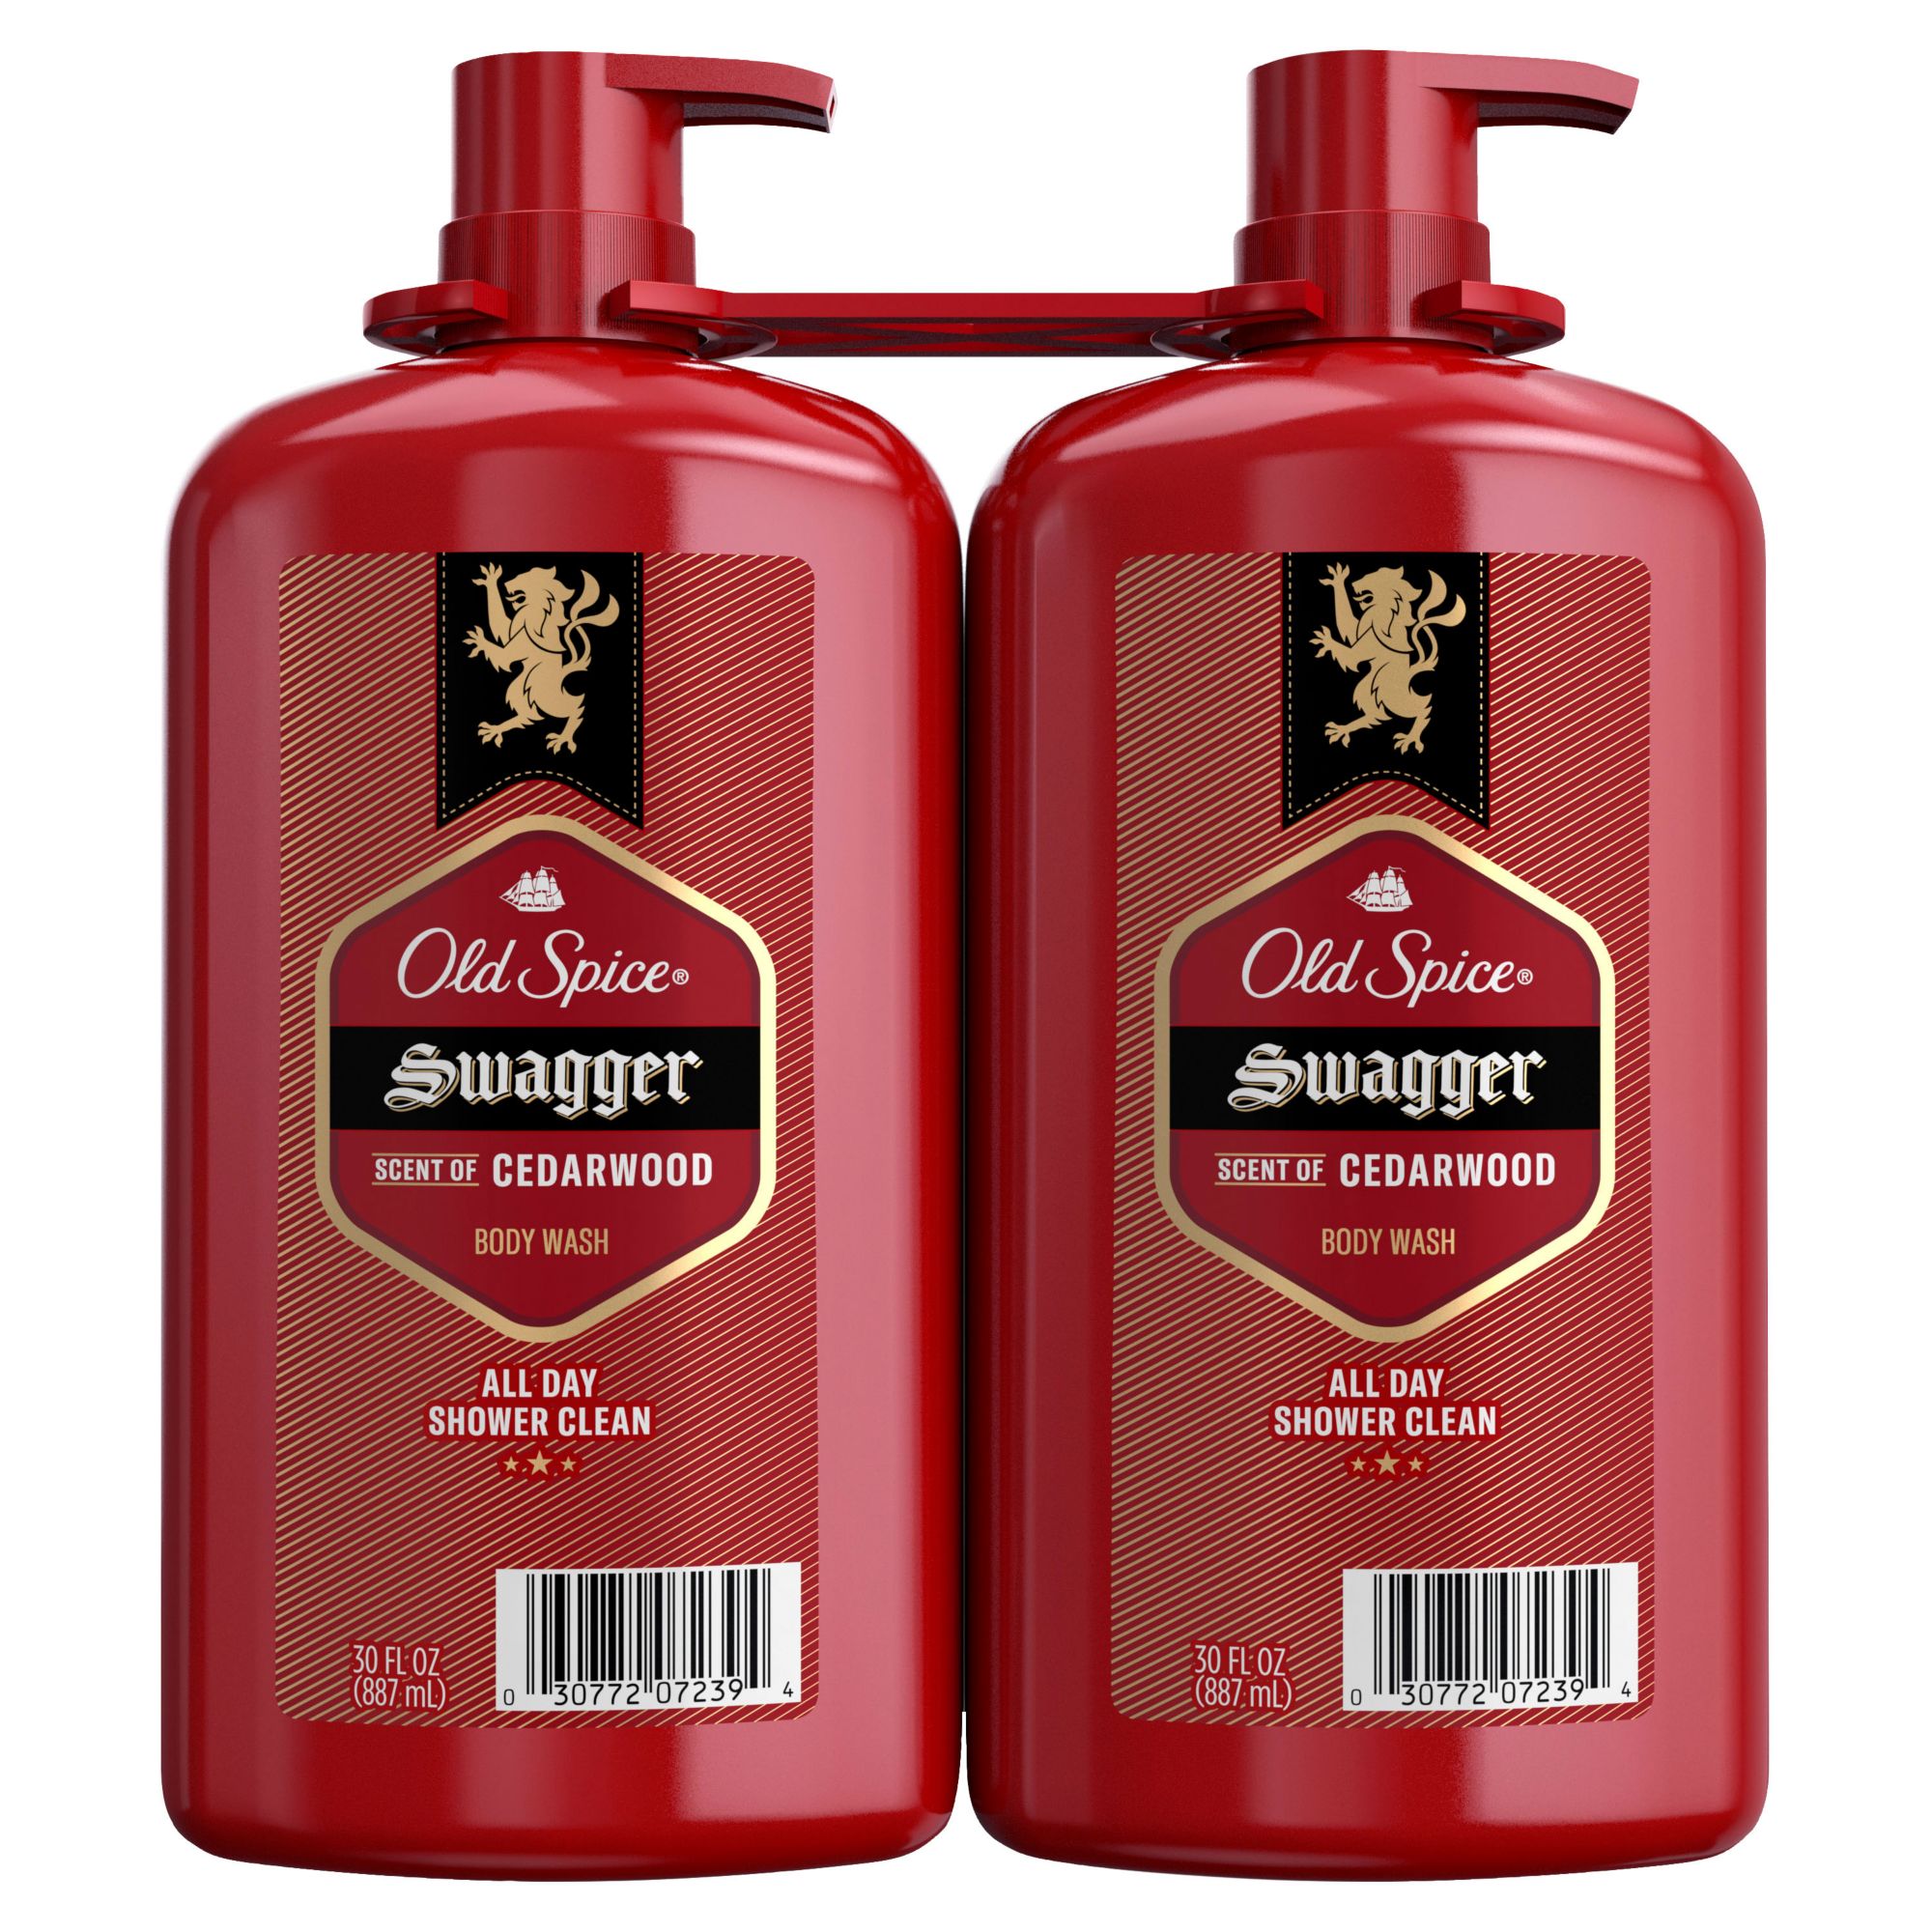 Old Spice Body Wash for Men - Swagger Scent, 2 pk./30 fl oz.